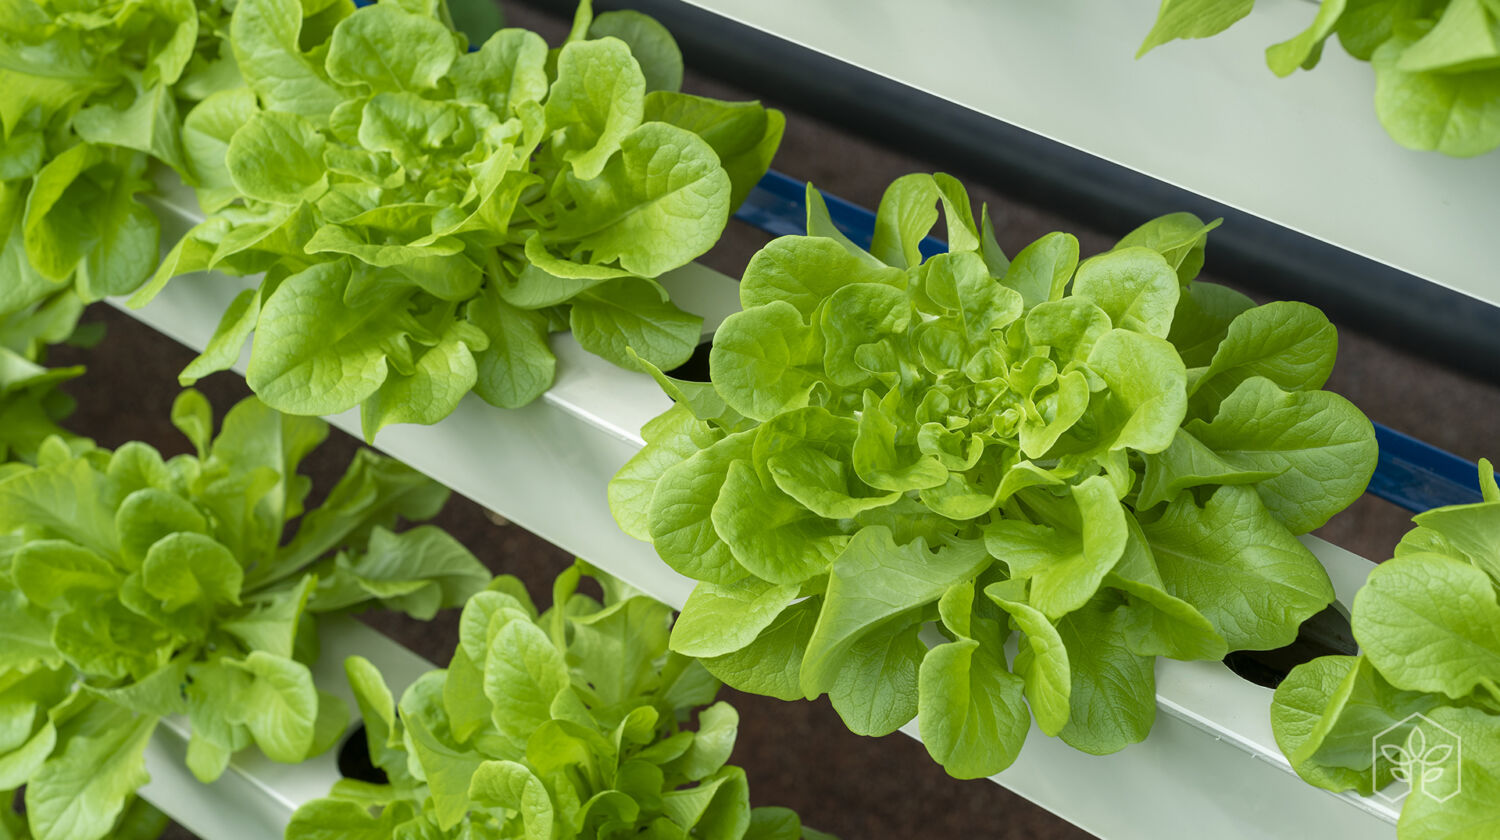 Aquaponic cultivation versus conventional hydroponic cultivation